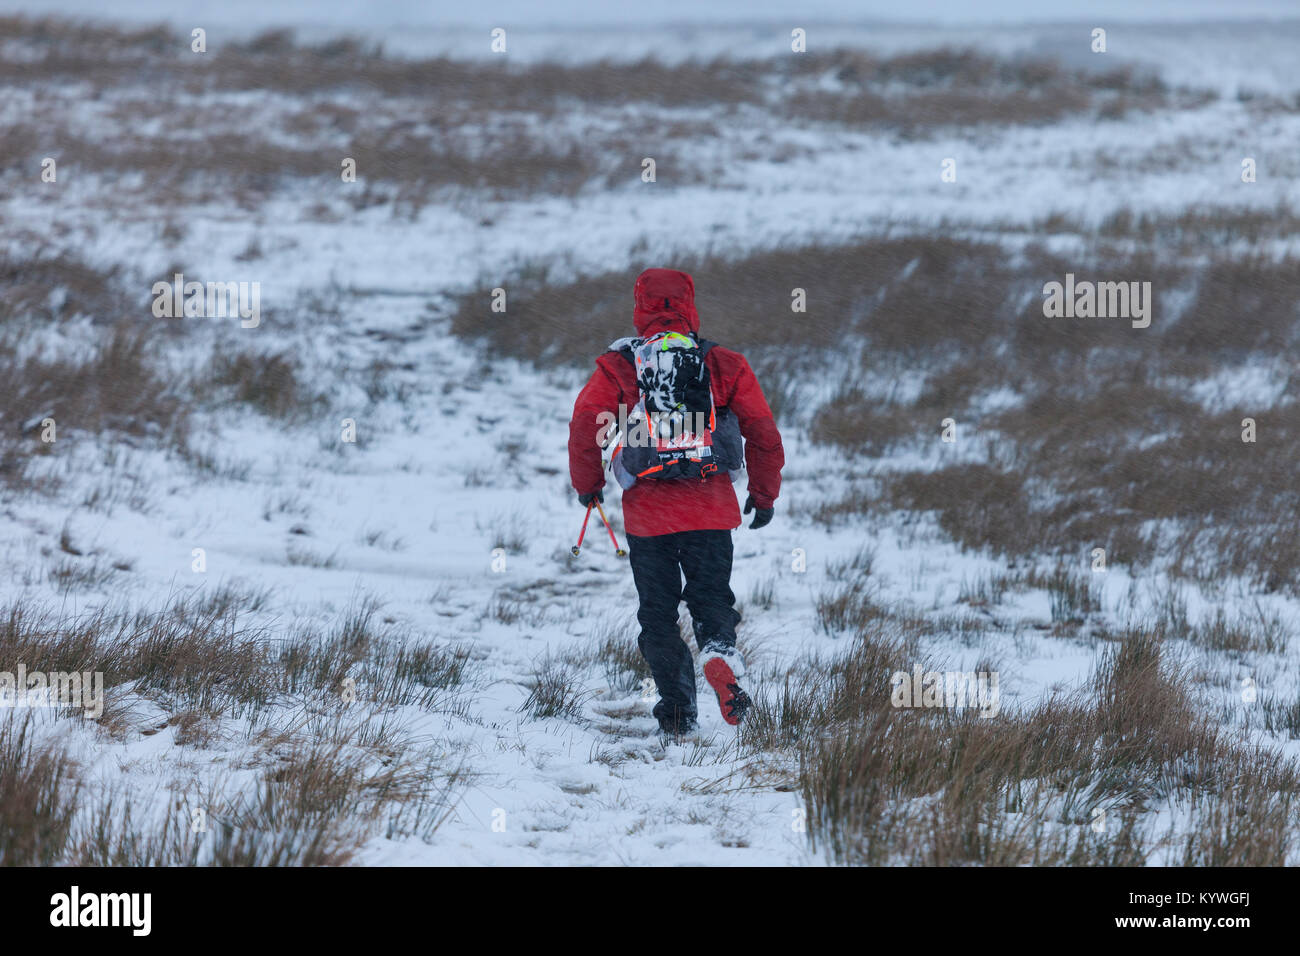 Baldersdale, County Durham UK. Tuesday 16th January 2018. Montane ® Spine ® Race competitors faced some tough winter conditions as they passed through Baldersdale in County Durham, UK, this afternoon. The 426km long Montane ® Spine ® Race is a gruelling none stop 7 day race and is one of the toughest endurance races in the world. The race starts in Edale and follows the Pennine Way, to finish in Kirk Yethholm in Scotland. Credit: David Forster/Alamy Live News Stock Photo